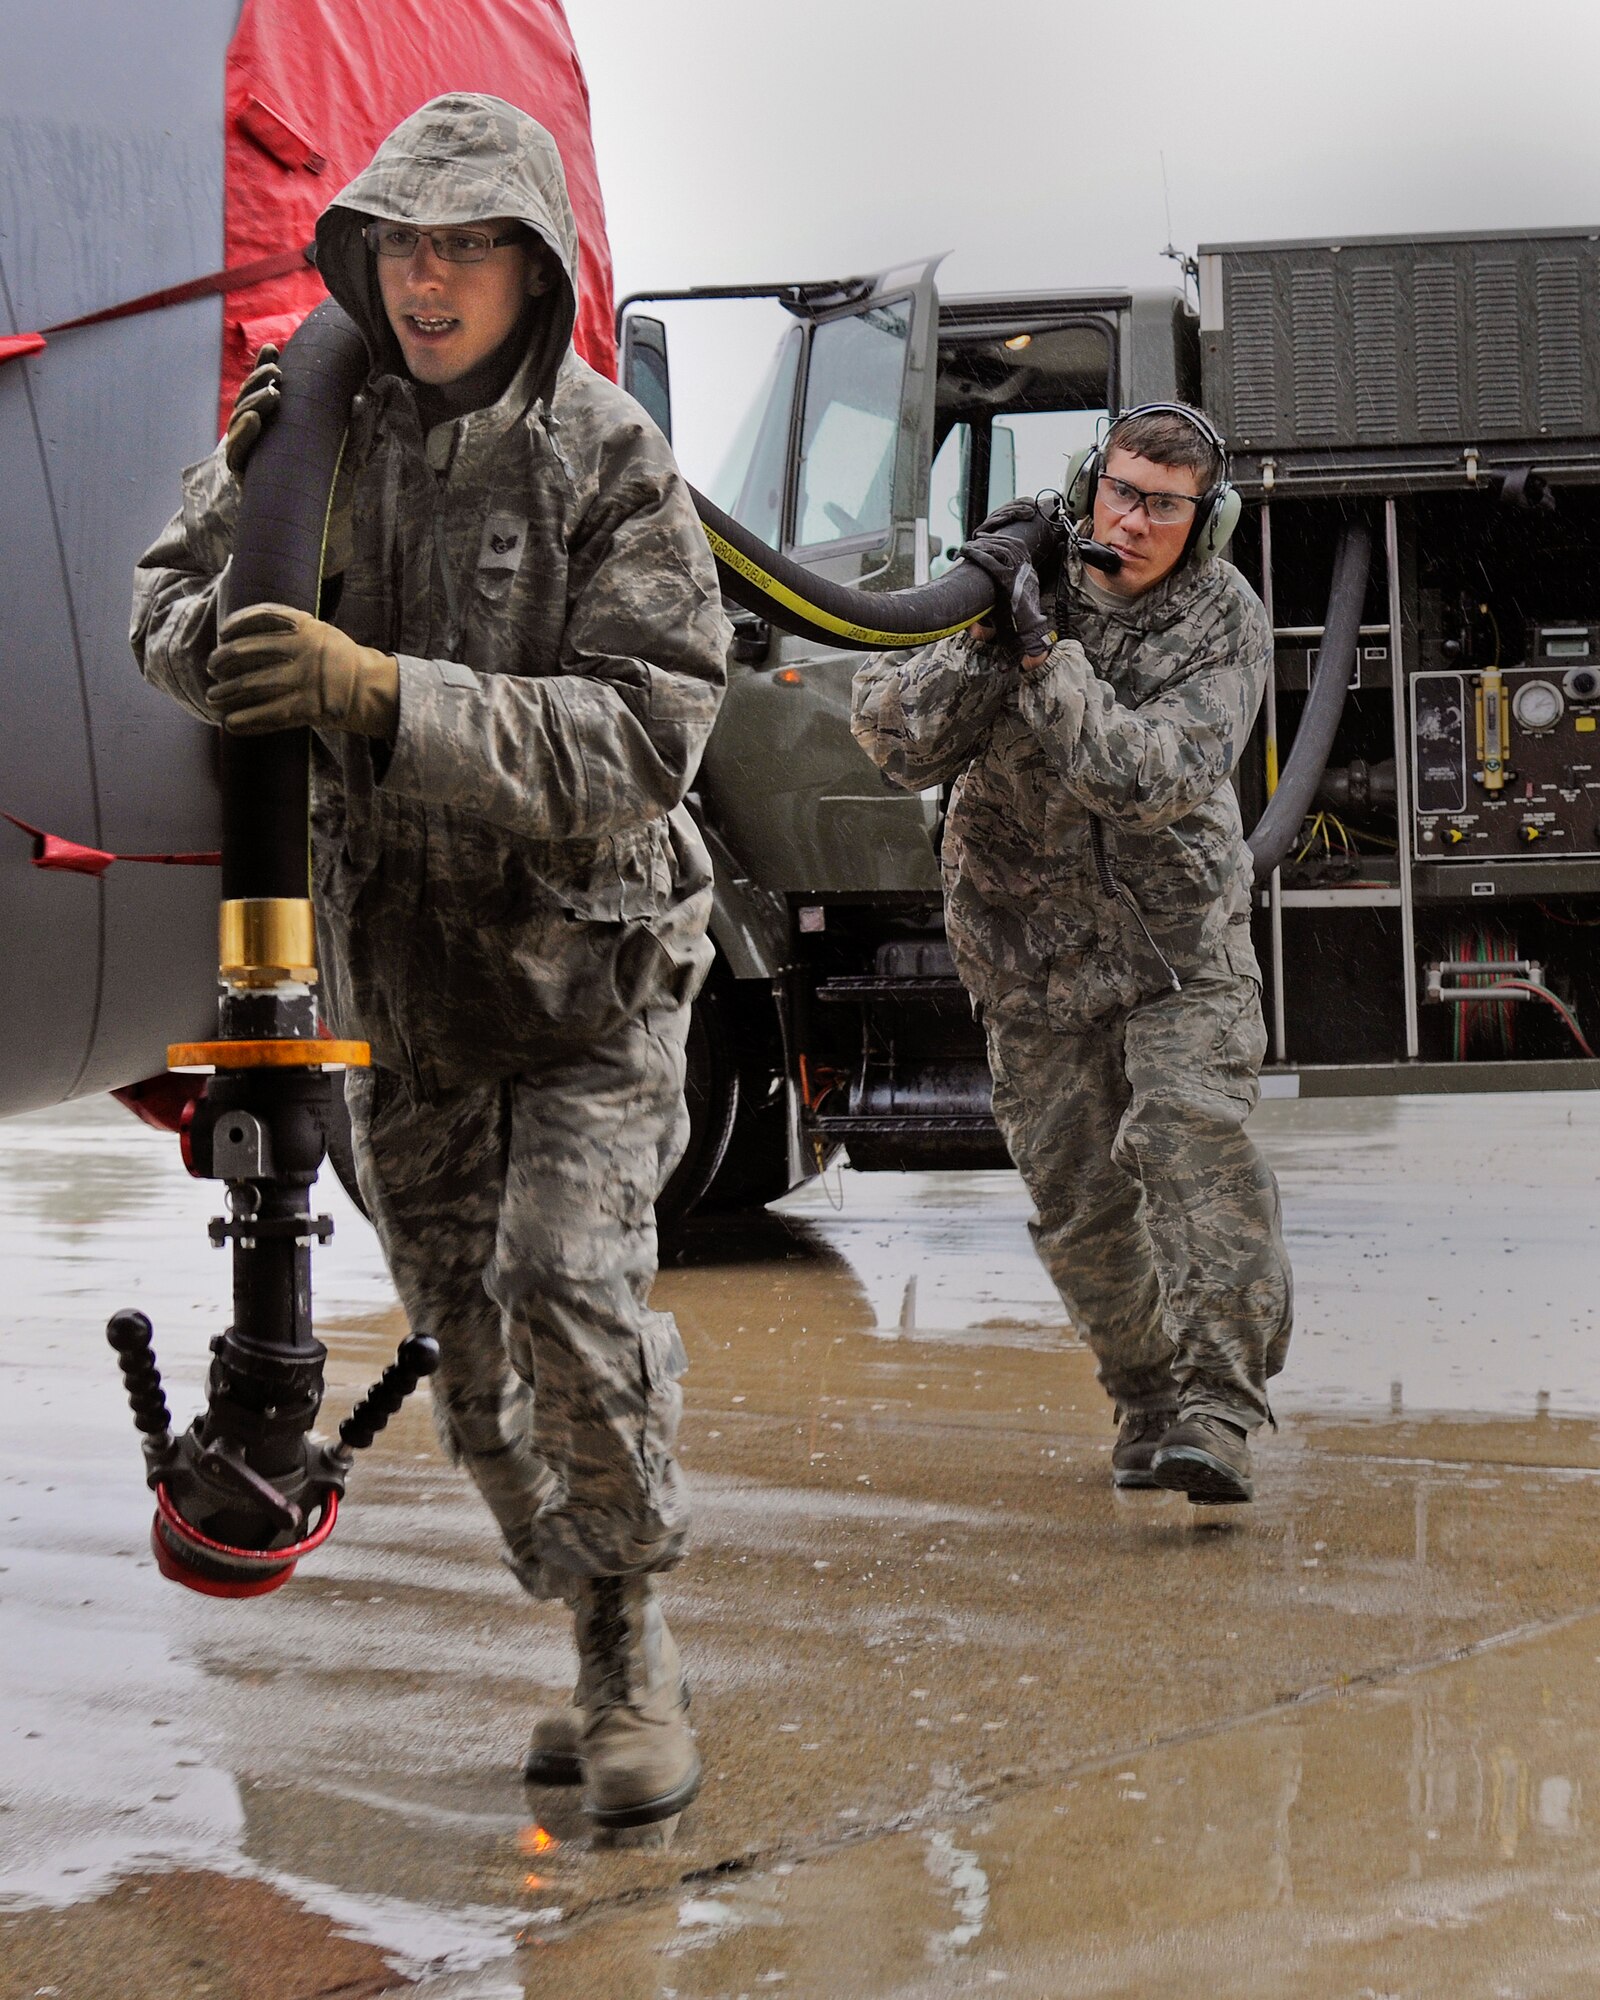 Staff Sgt. Daniel Vergun, 127th Logistics Readiness Squadron fuels technician, and Staff Sgt. Jesse Torma, 191st Maintenance Squadron crew chief, carry the fuel hose to a KC-135 Stratotanker on the flightline at Selfridge Air National Guard Base, Mich., July 9, 2015. Fully loaded, a KC-135 can hold up to 203,000 pounds of fuel. On a typical day, the average load is around 40,000 pounds or 5,900 gallons of fuel. (U.S. Air National Guard Photo by Senior Airman Ryan Zeski/Released)